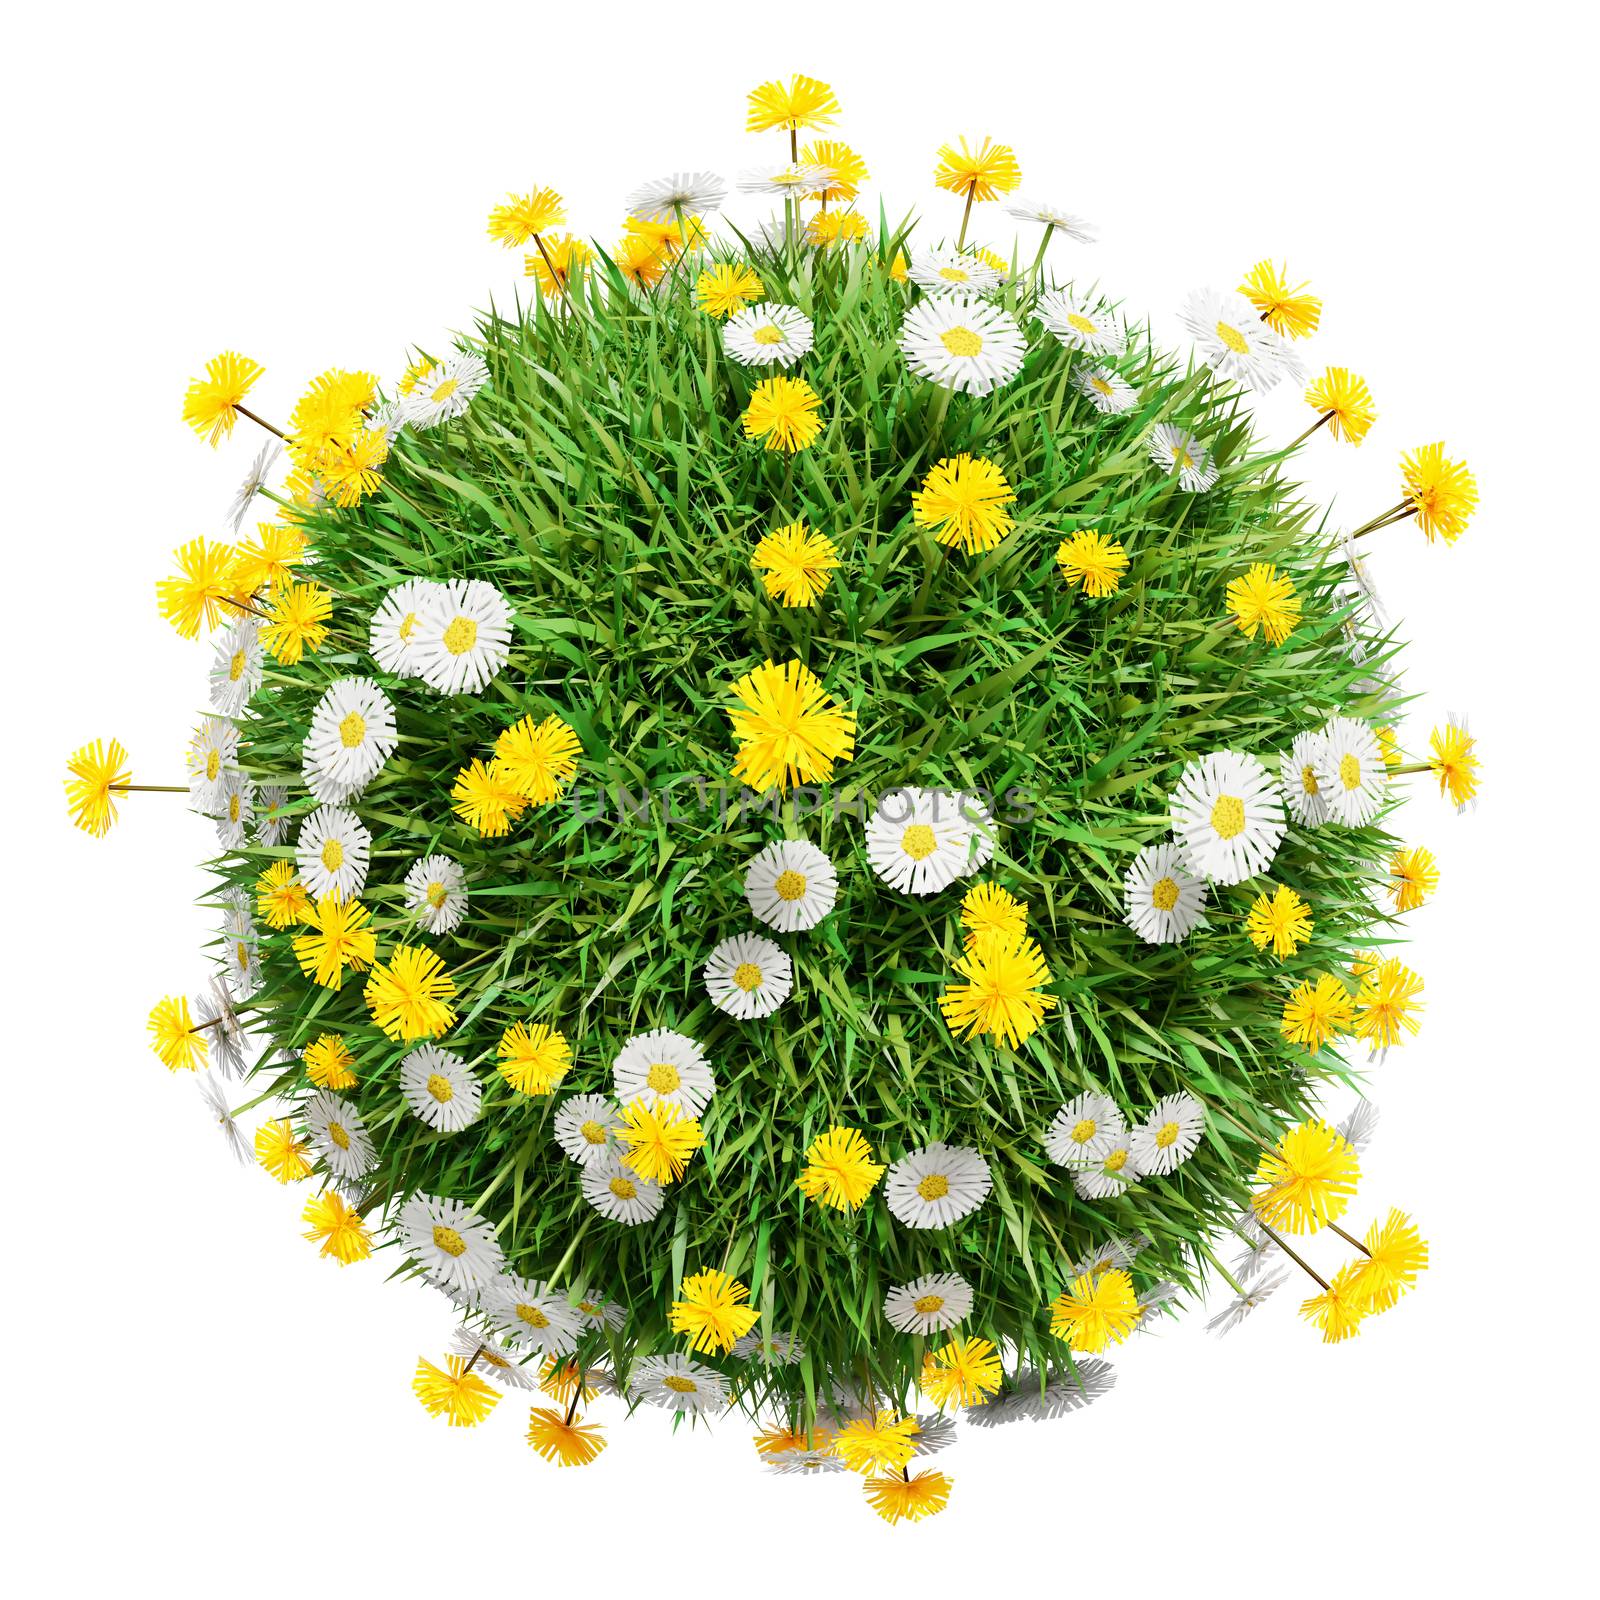 Green grass sphere with flowers, isolated on a white background. The symbol of spring, environment, growth and nature. 3D illustration